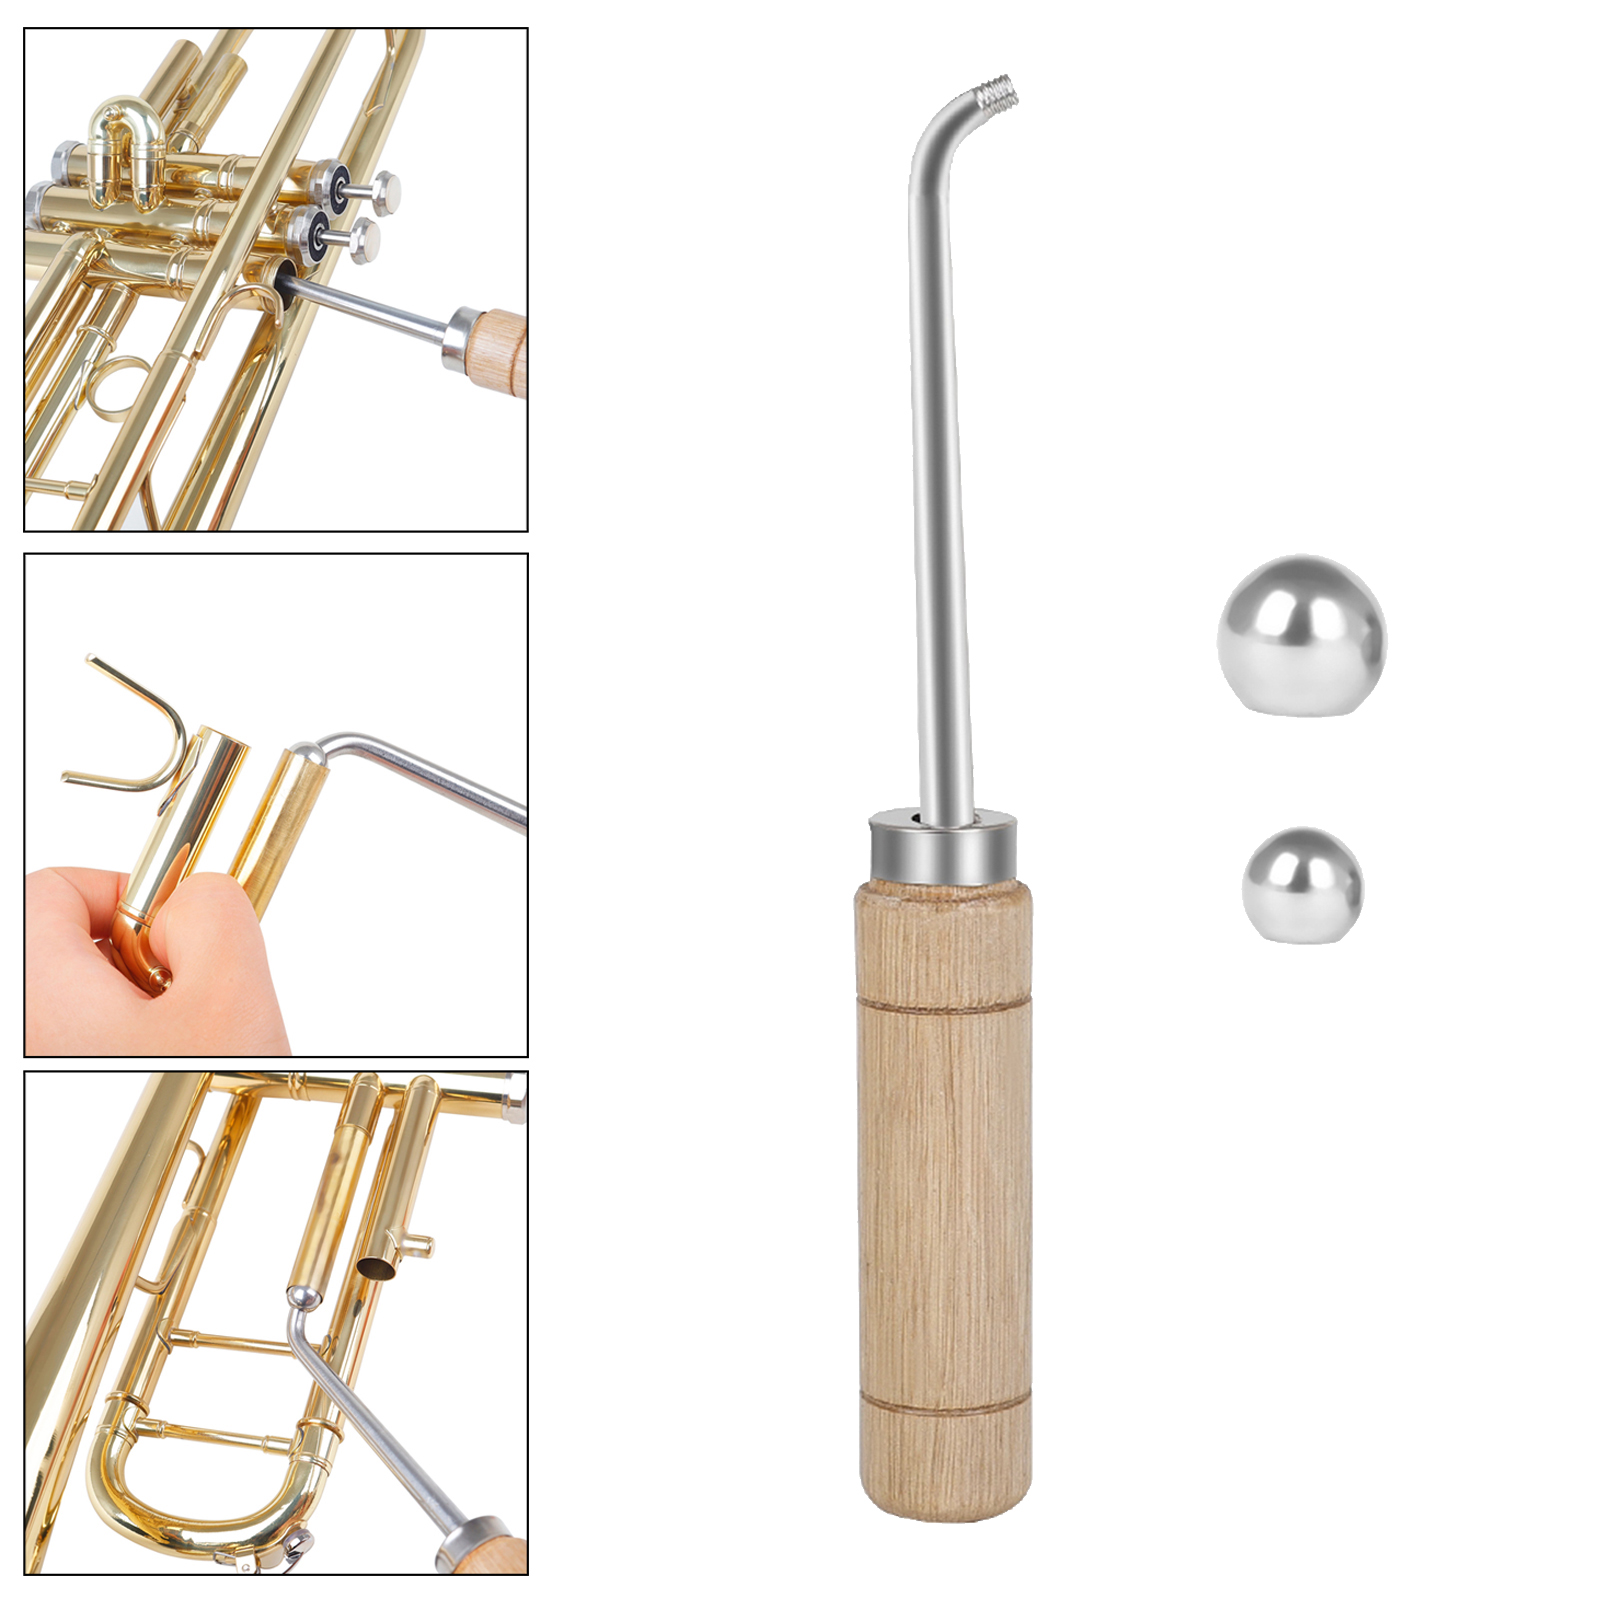 Trumpet Repair Tool Comfort Handle Polished Music Instrument Maintenance with 2 Metal Balls Accessories Parts